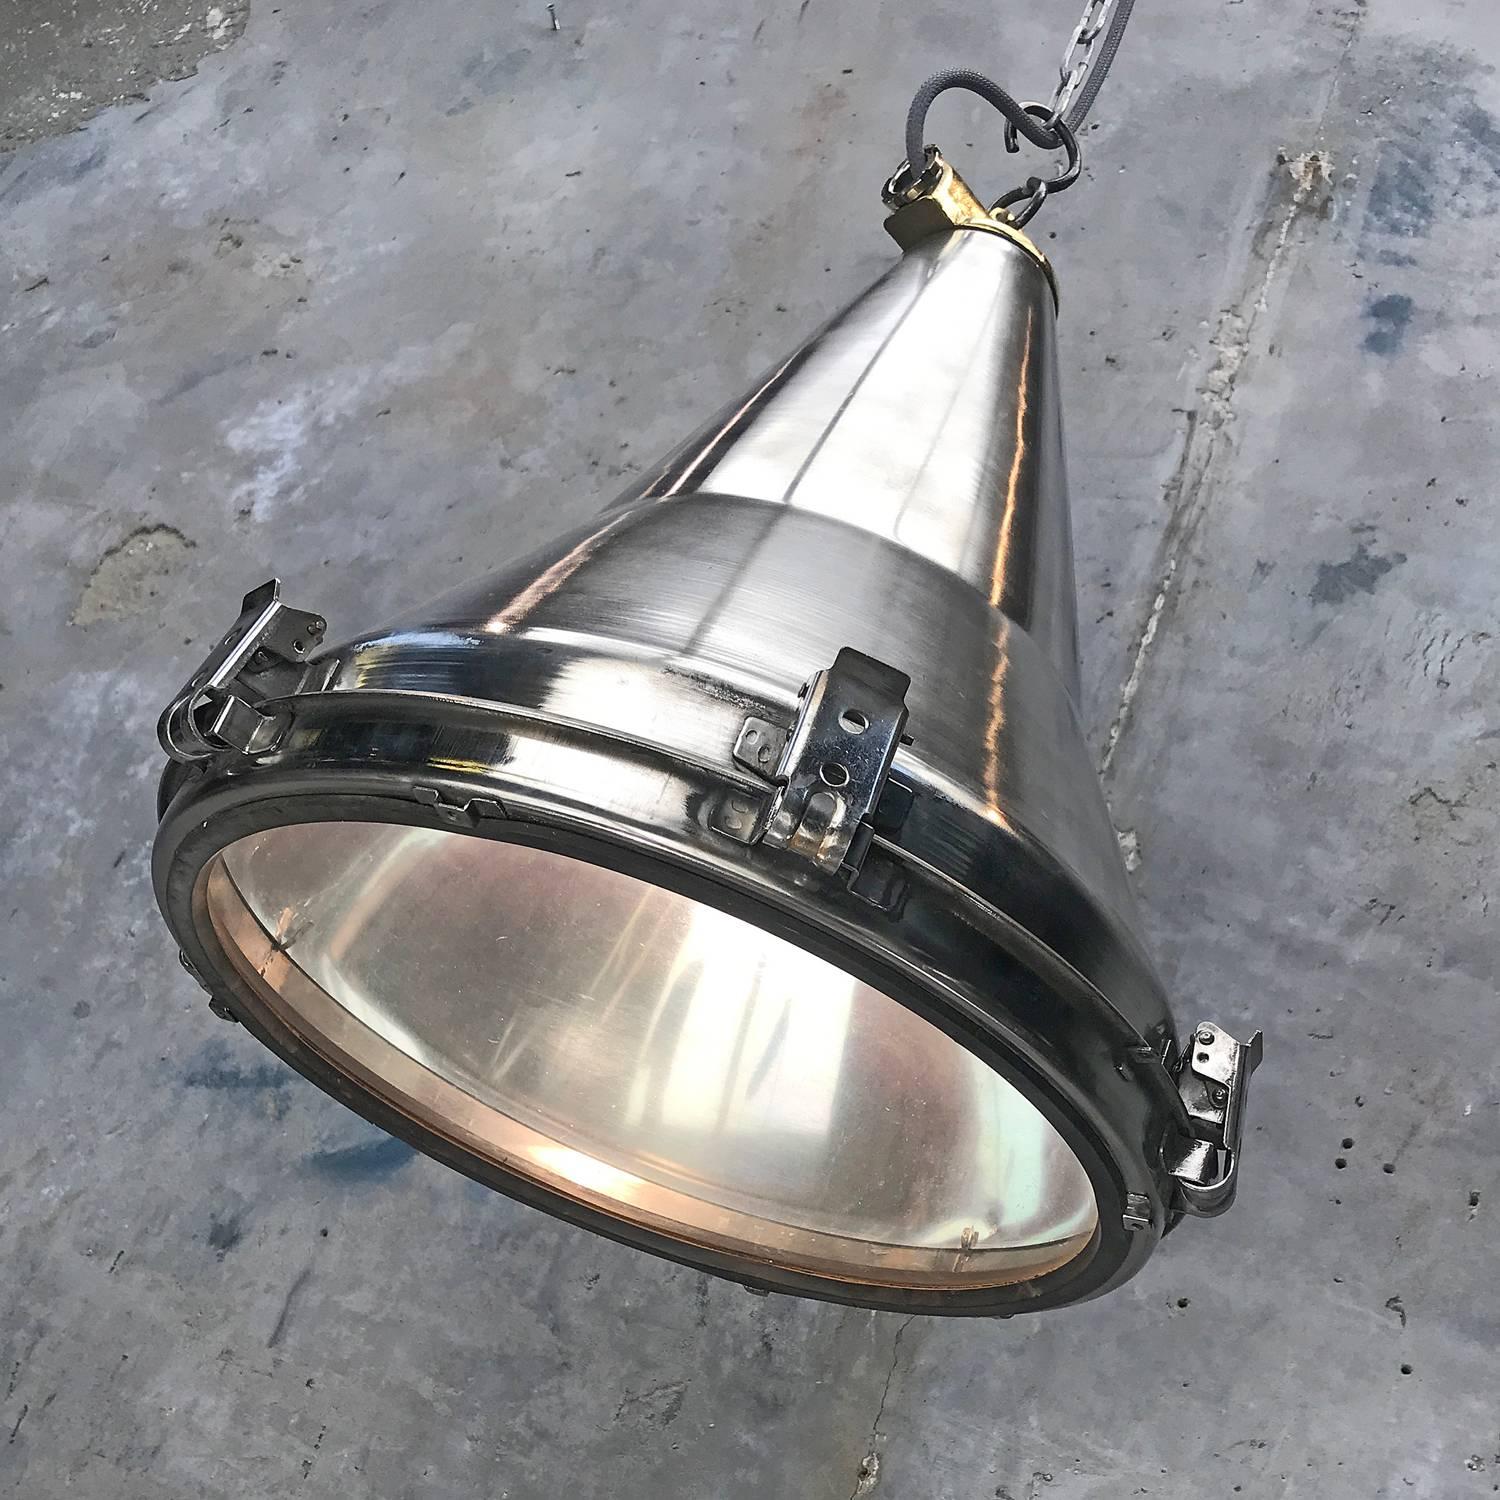 This light was one of many salvaged from cargo ships made in Korea circa 1980 and is very well designed and constructed.

They were originally used on masts and gantries of cargo ships and super tankers to flood light the container deck.

The